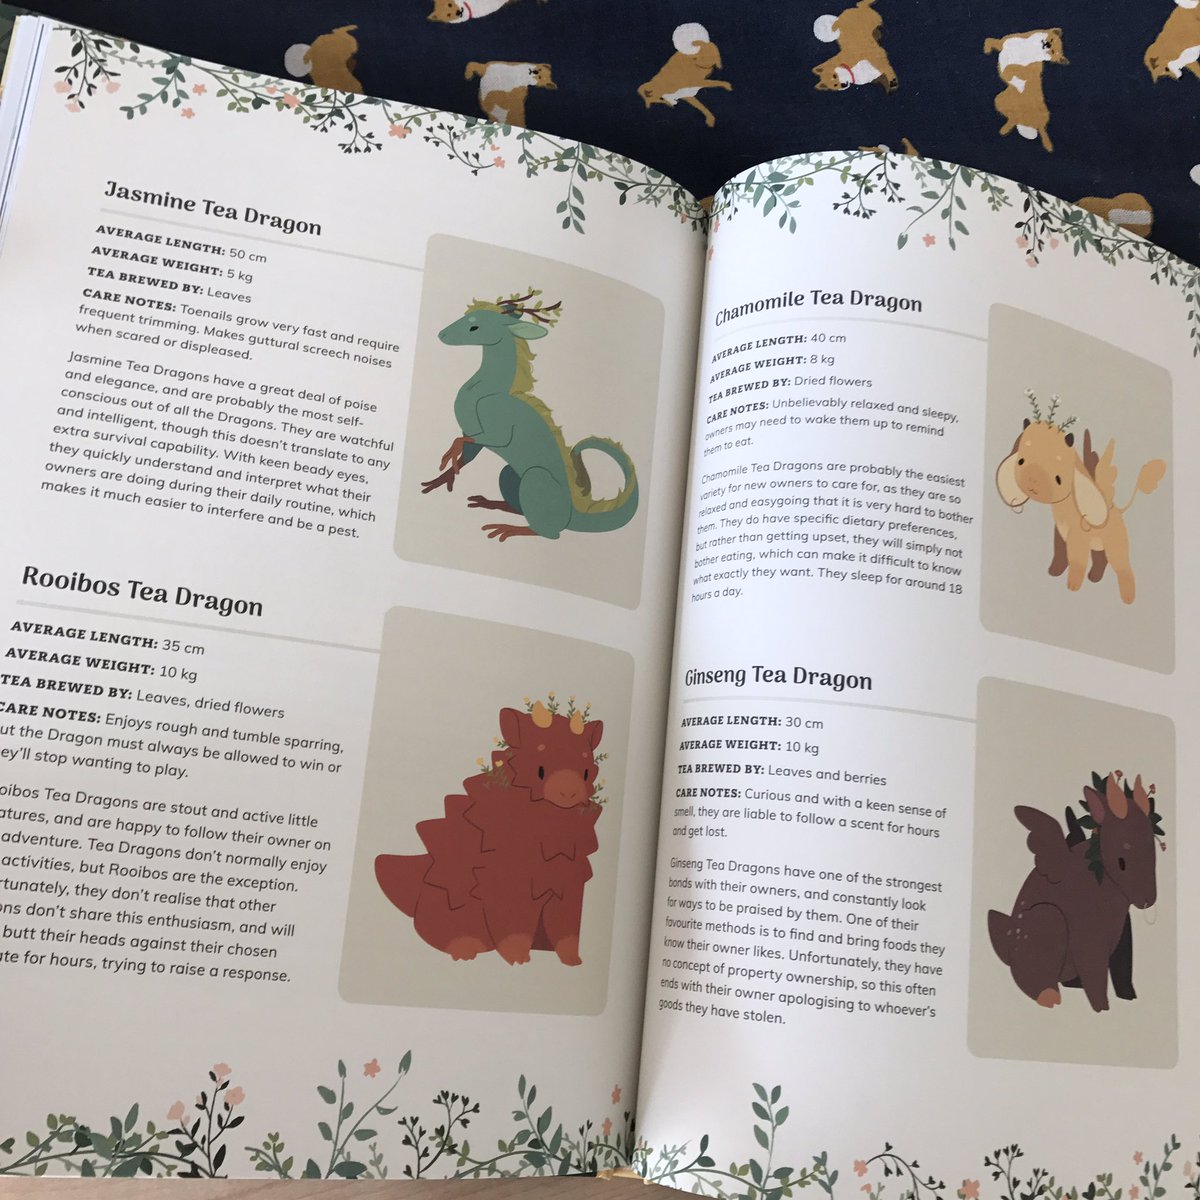 Kay My Copy Of The Tea Dragon Society Arrived And It S So Big And The Printing Is Amazing Thanks So Much To The Onipress Team Kidlit T Co D1qcfm54cp